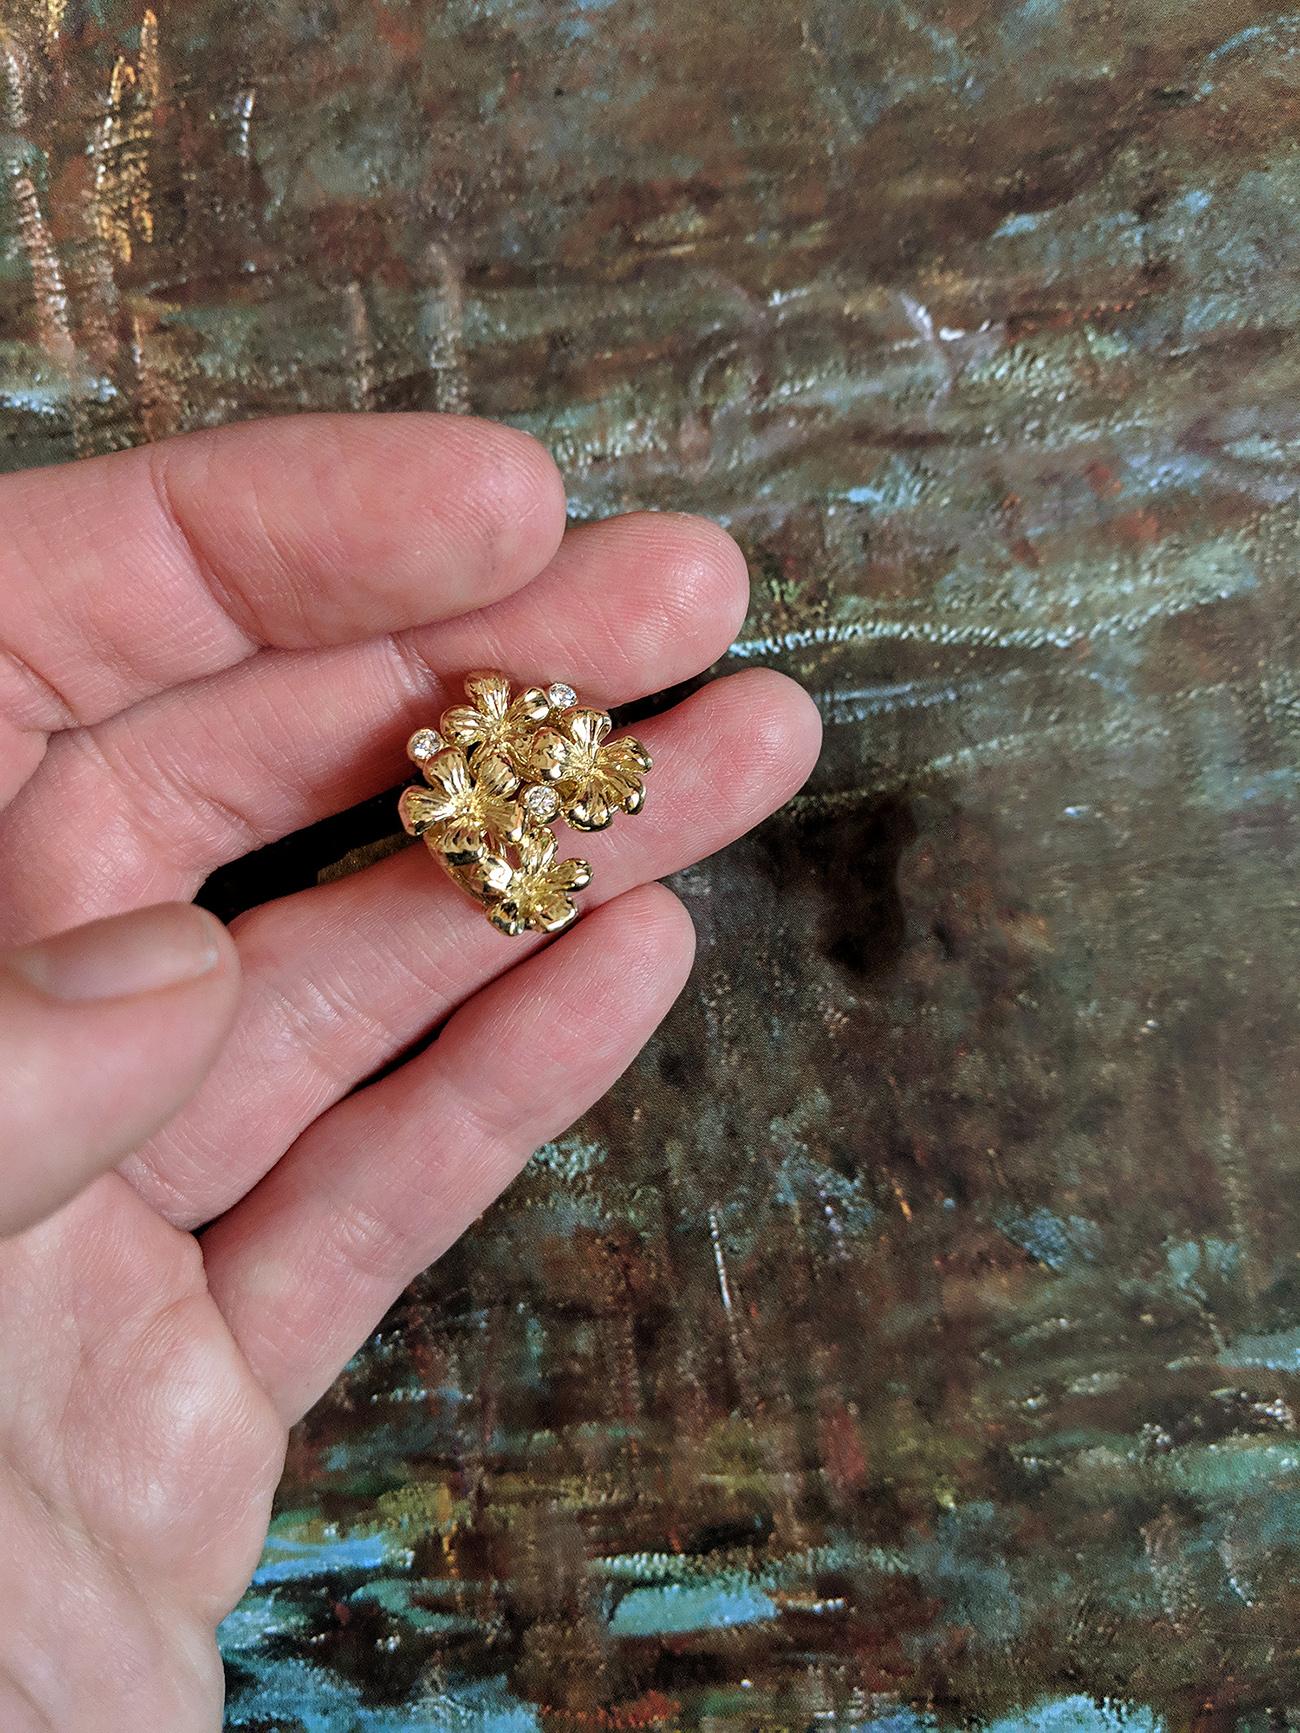 14 karat yellow gold Plum Blossom brooch with a removable lemon quartz drop, encrusted with 3 round diamonds, is a contemporary jewellery piece that has been featured in Vogue UA reviews. The cabochon lemon quartz can be easily replaced with other